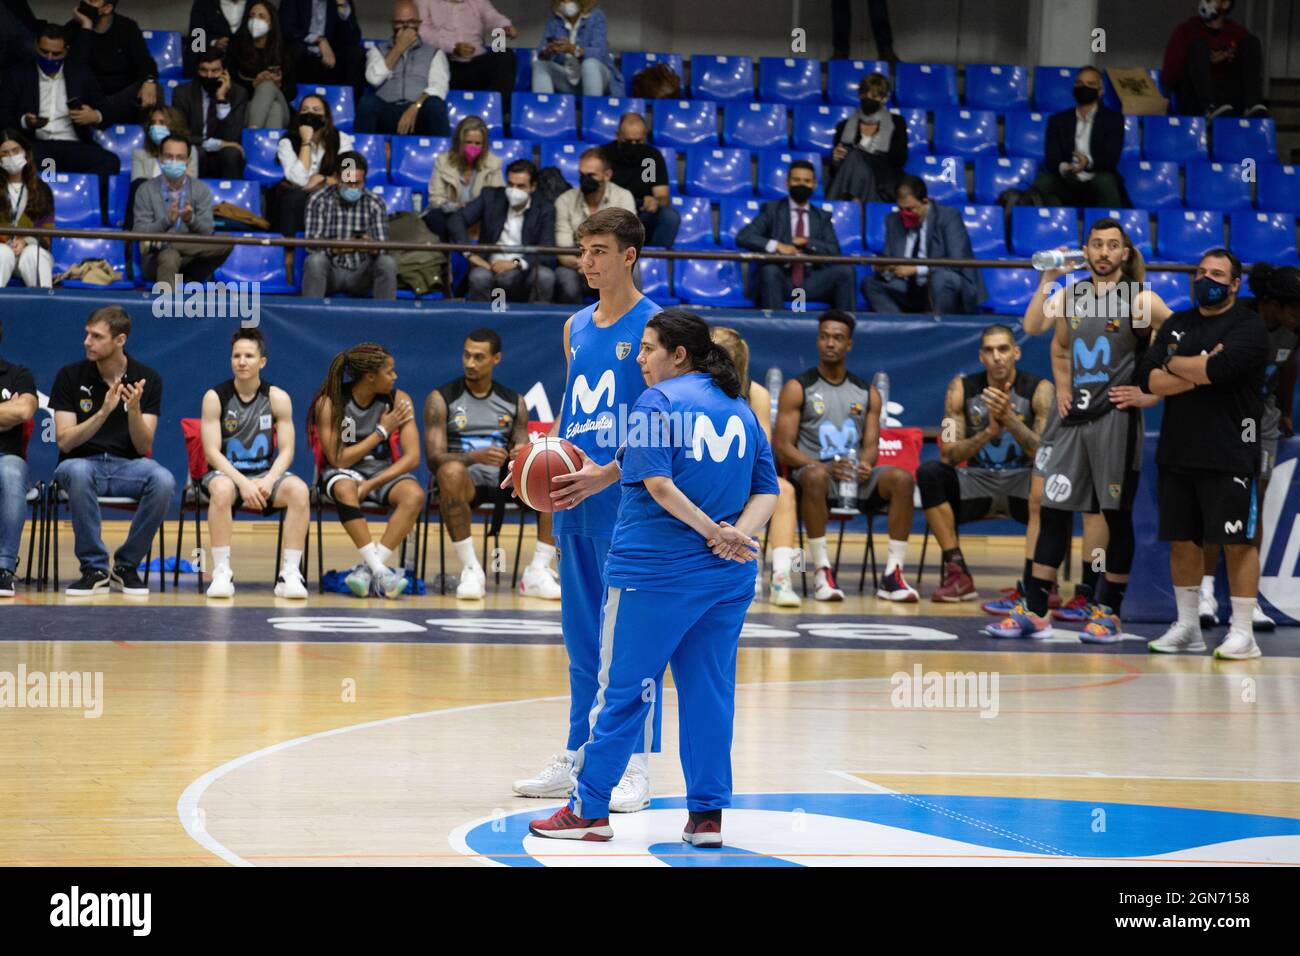 MADRID, SPAIN - 22 SEPTEMBER 2021: Nora Martins Villarino, player of the inclusive quarry of Movistar Estudiantes with Alex Montero, player of the male subsidiary of the EBA league.  Credit: Oscar Ribas Torres / Medialys Images/Sipa USA Stock Photo